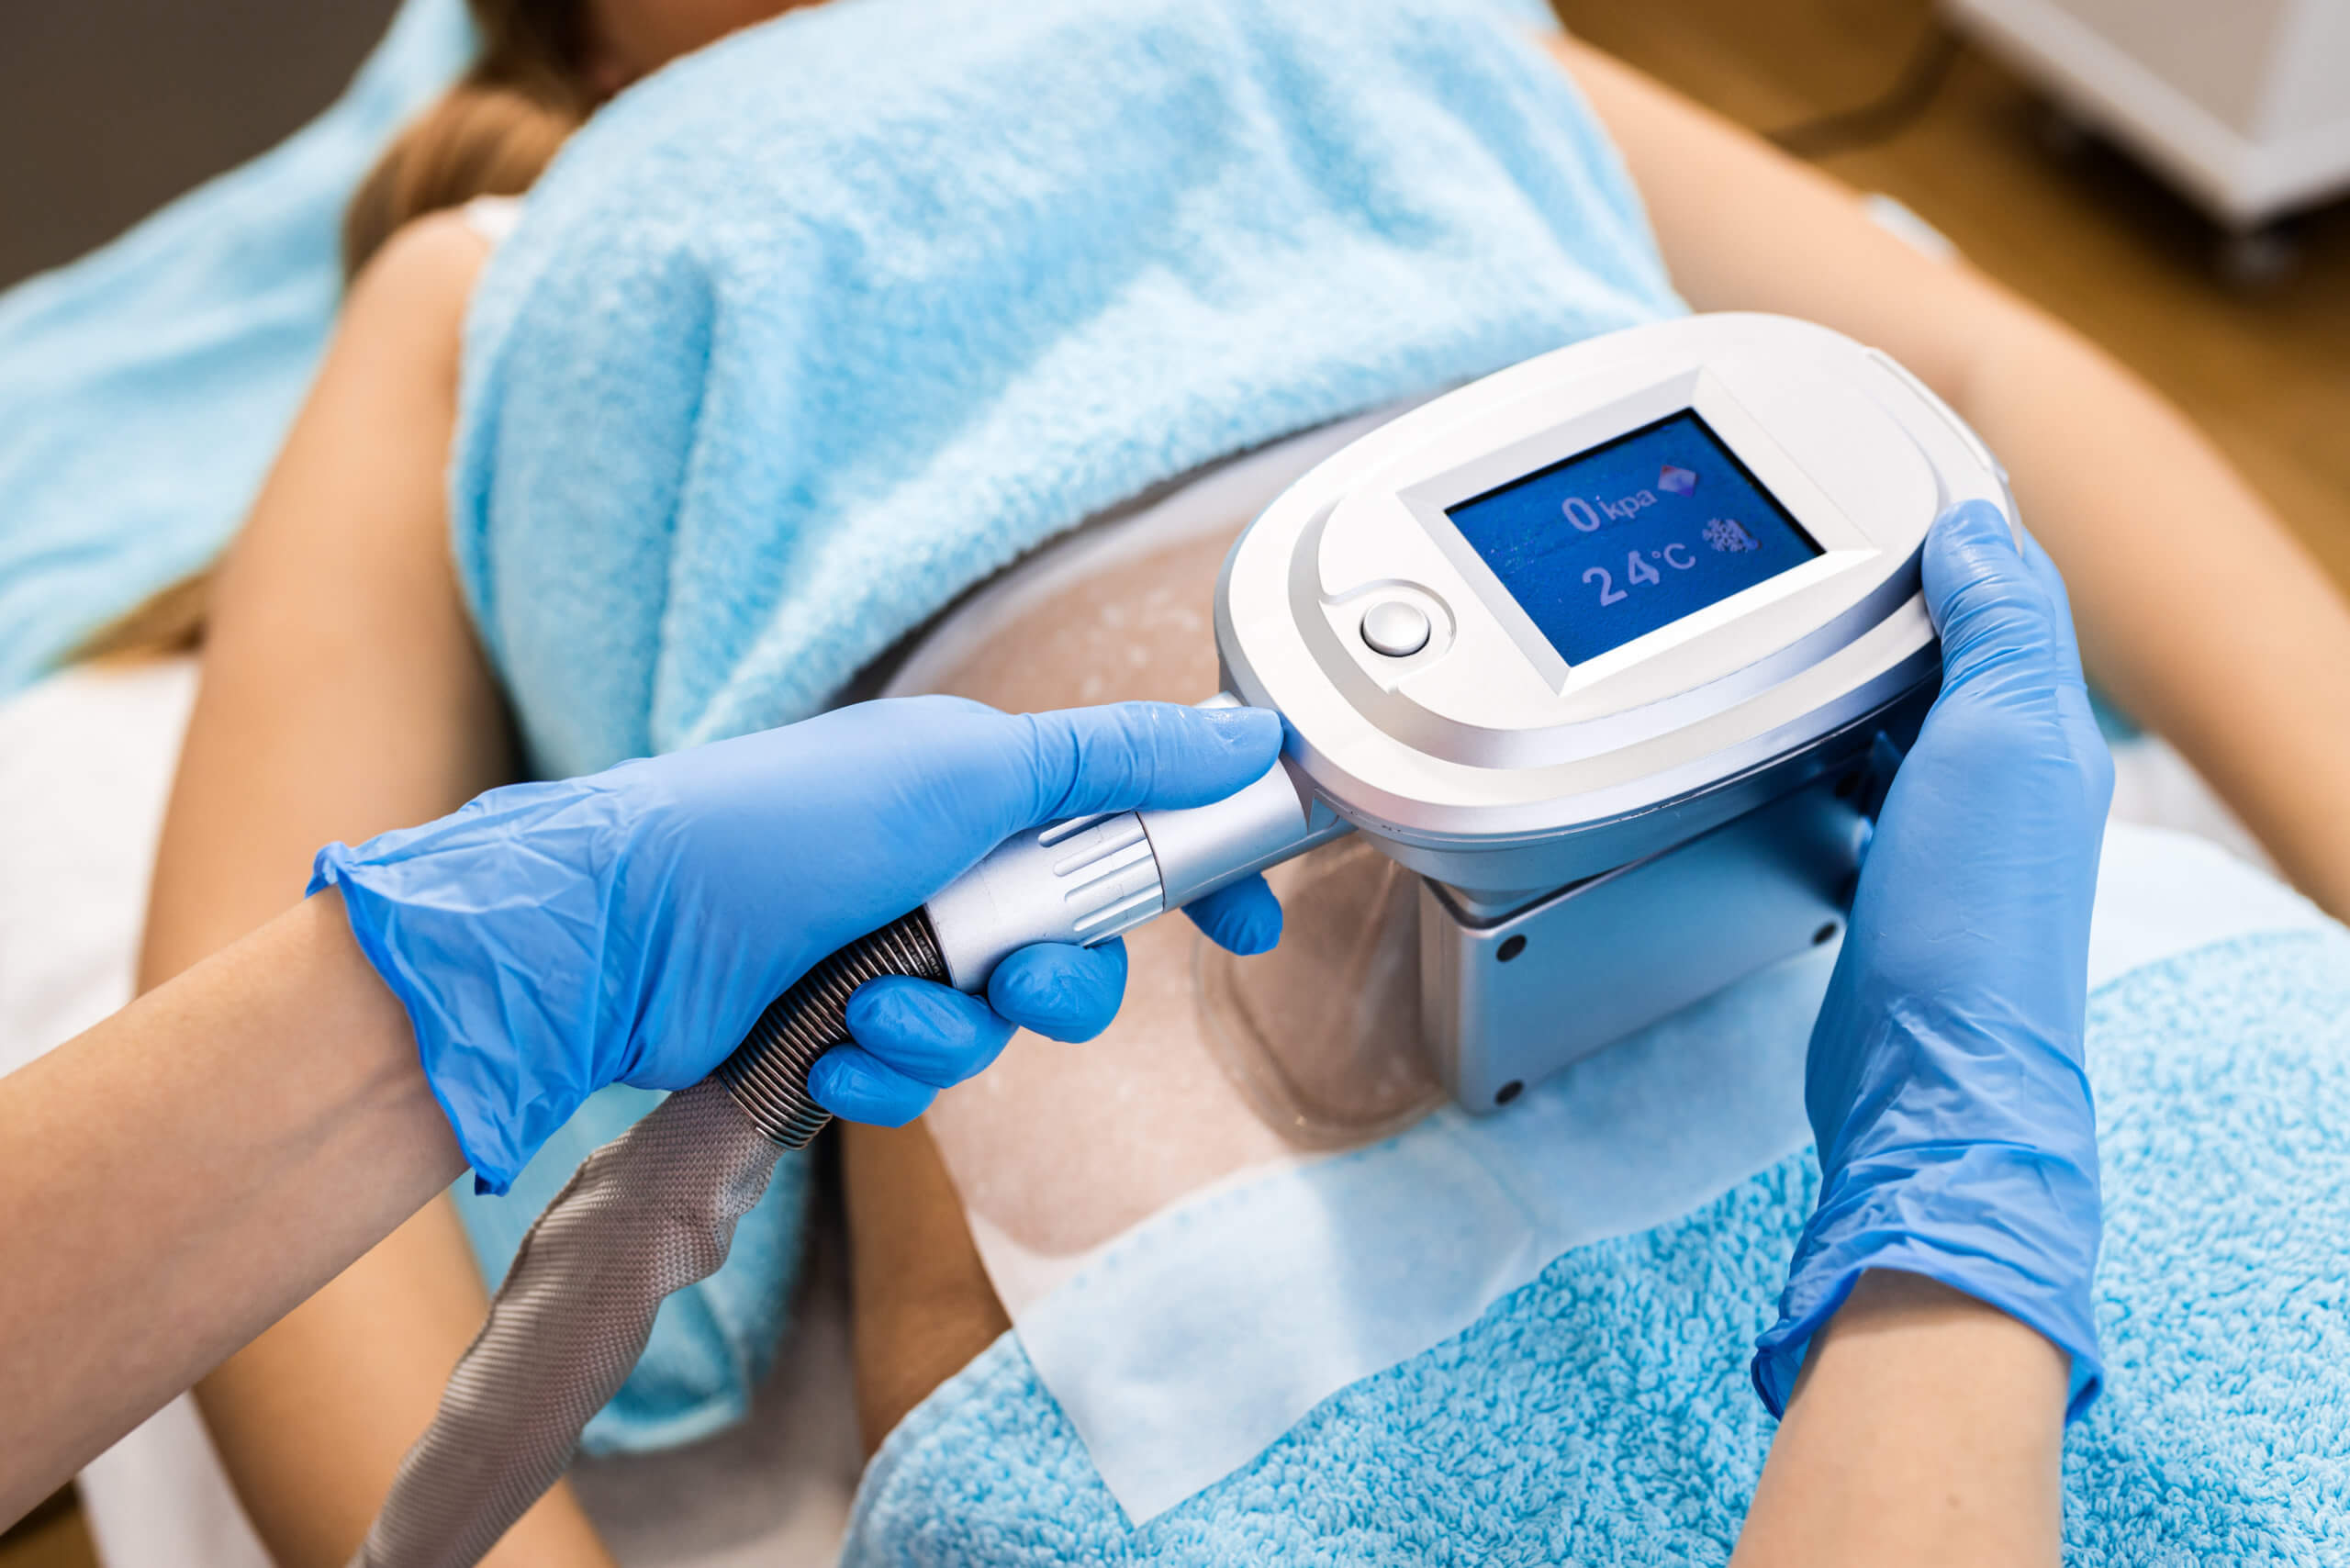 CoolSculpting: Risks, Side Effects, and Does It Really Work?